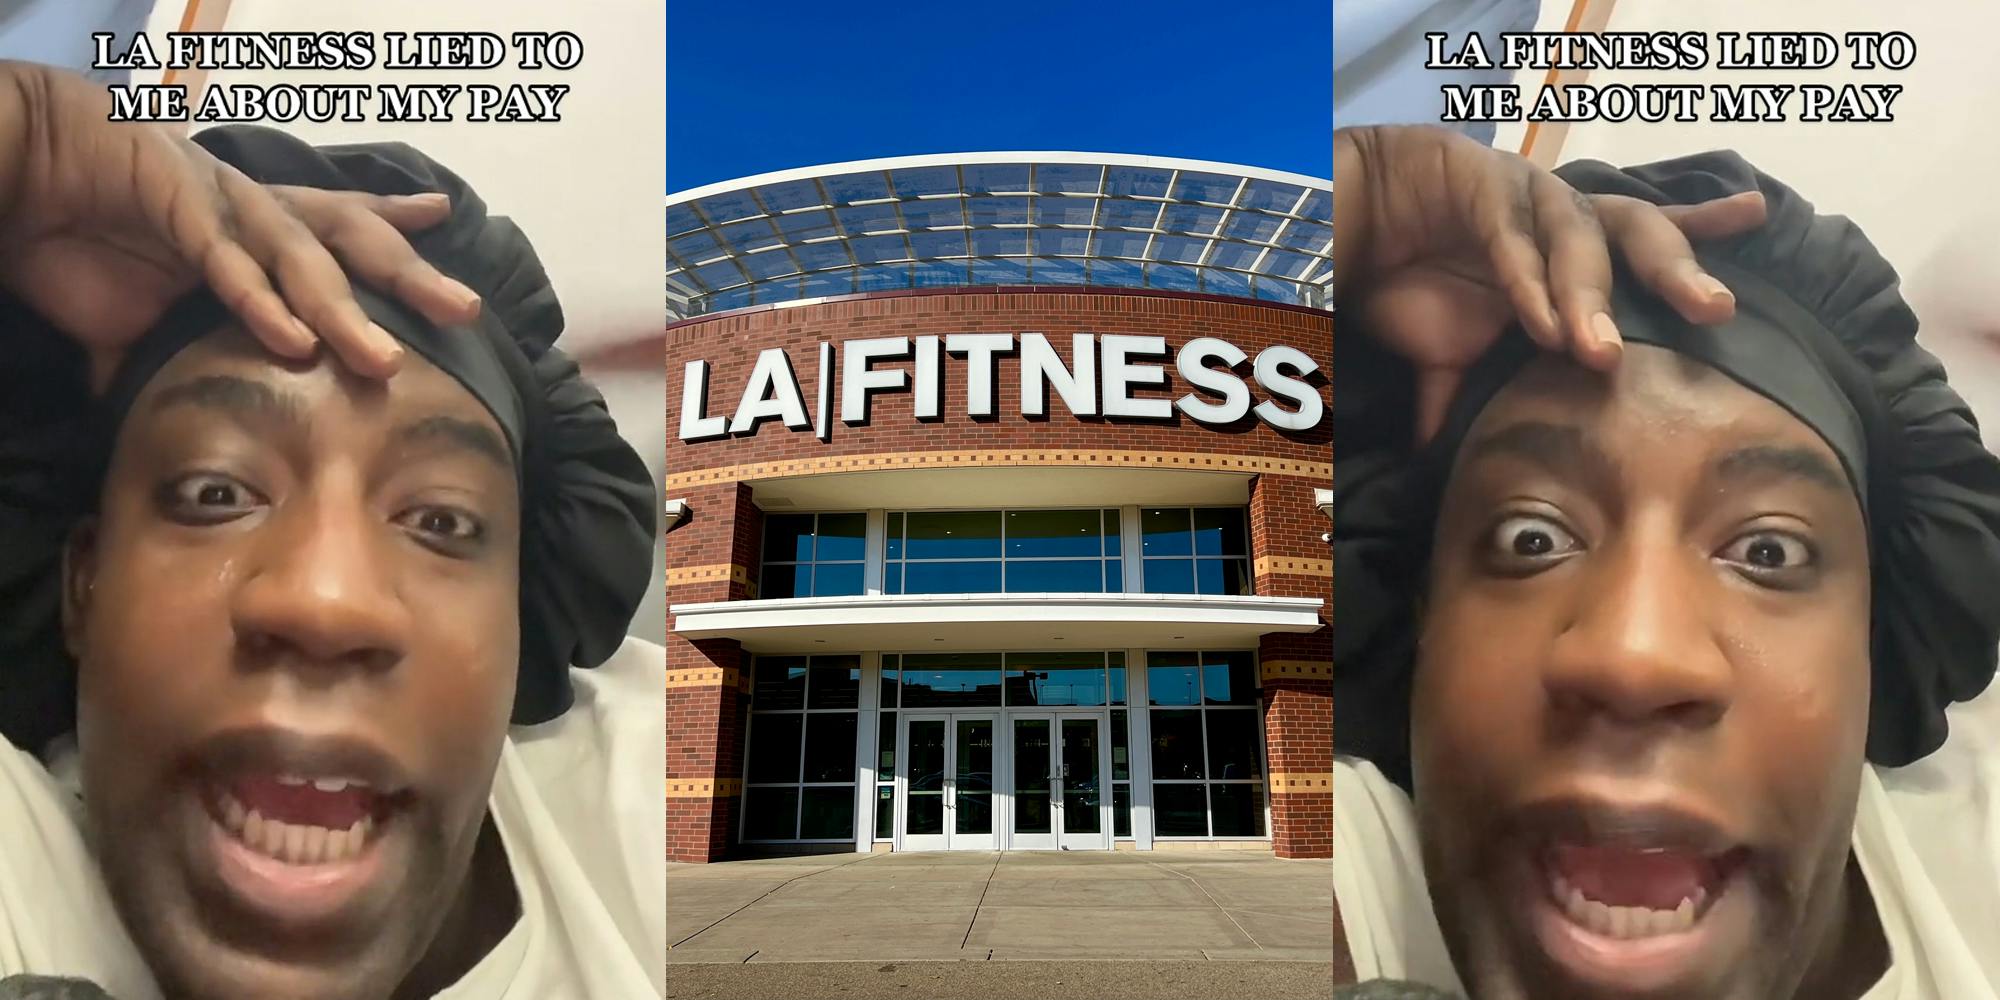 LA Fitness worker speaking with caption "LA FITNESS LIED TO ME ABOUT MY PAY" (l) LA Fitness building with sign (c) LA Fitness worker speaking with caption "LA FITNESS LIED TO ME ABOUT MY PAY" (r)